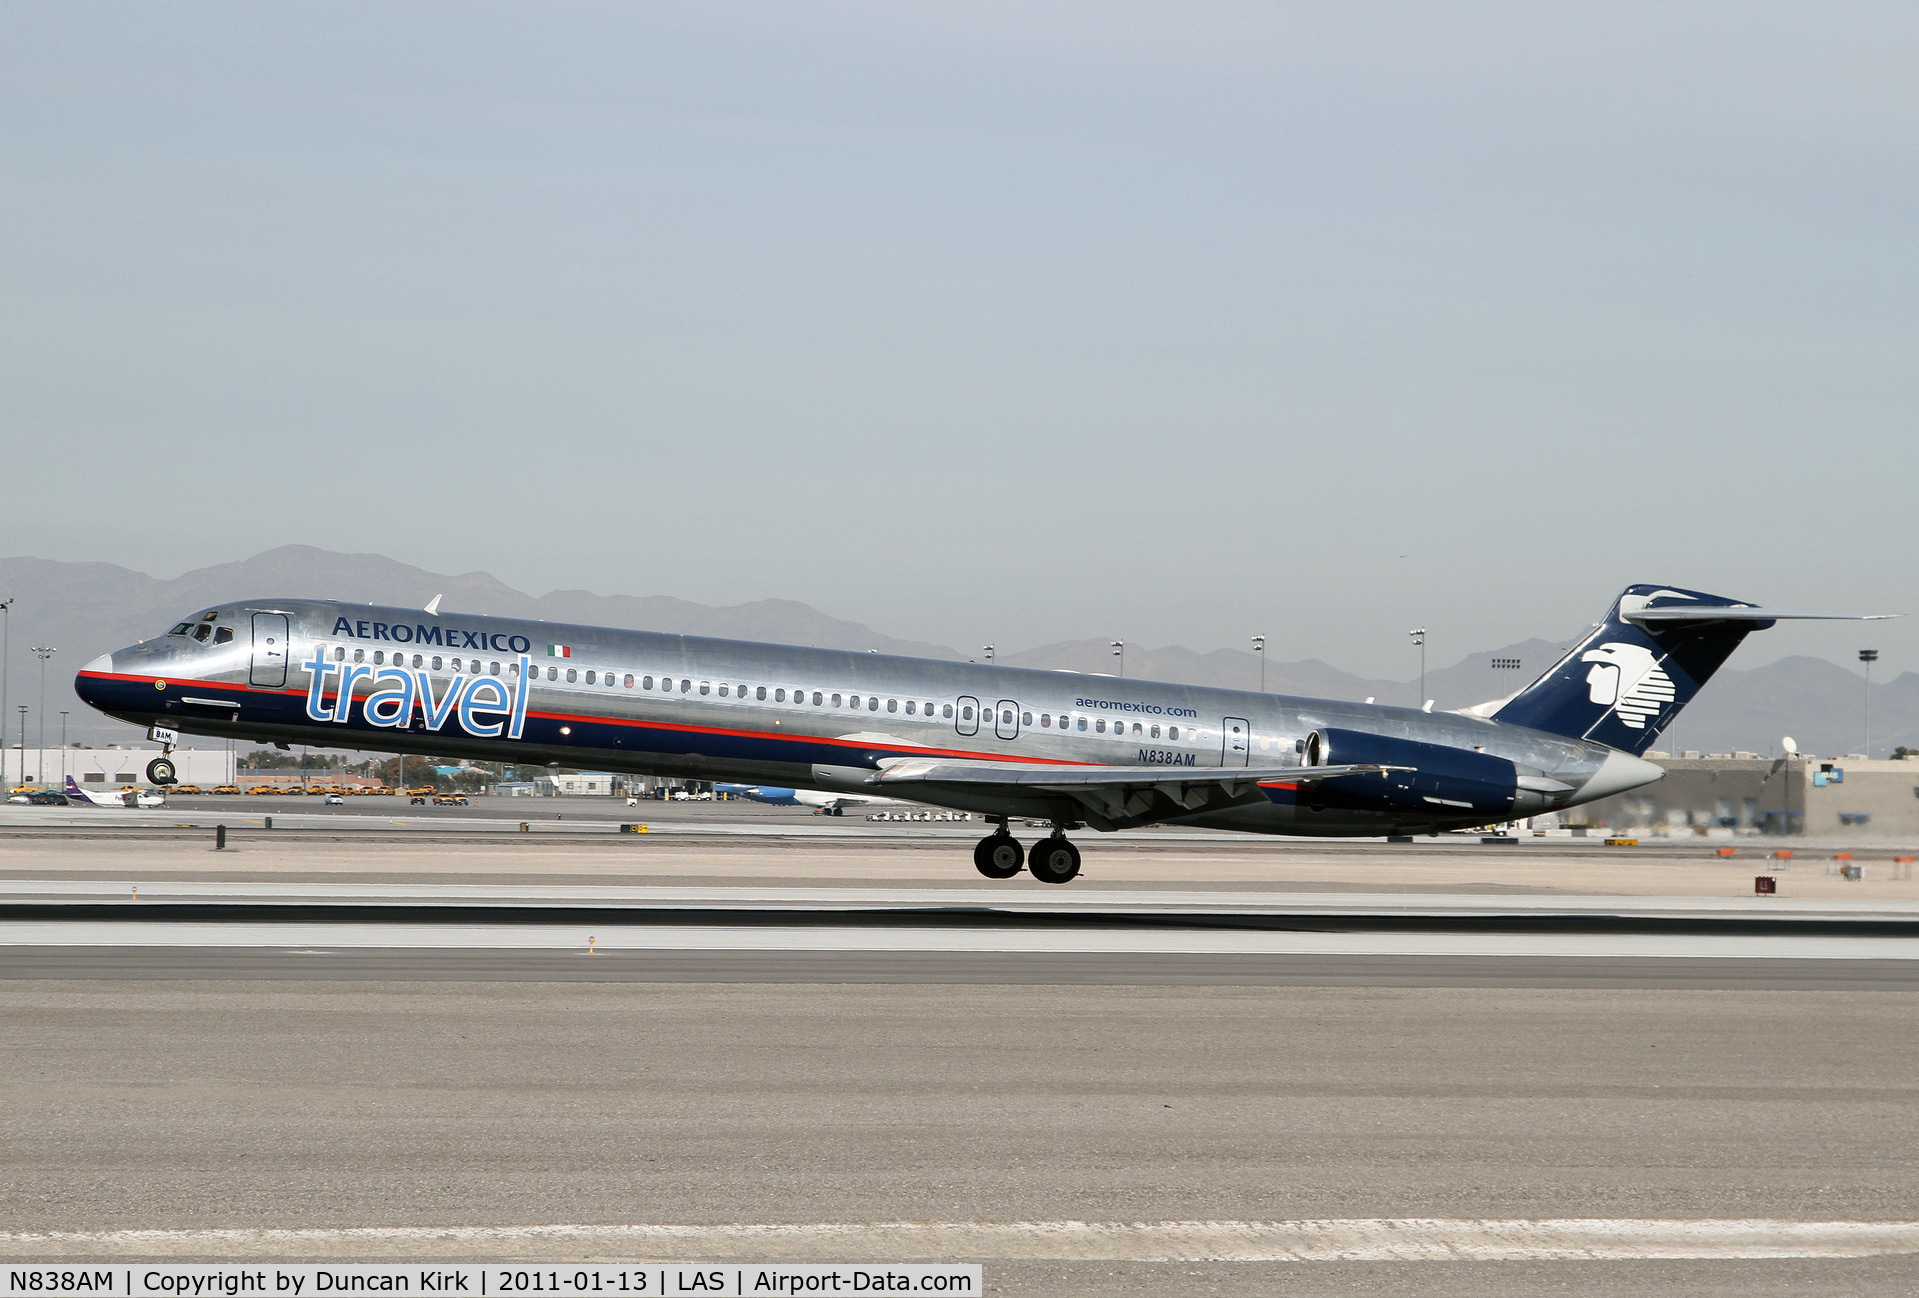 N838AM, 1986 McDonnell Douglas MD-83 (DC-9-83) C/N 49397, In old AeroMexico colours with big 'Travel' titles.